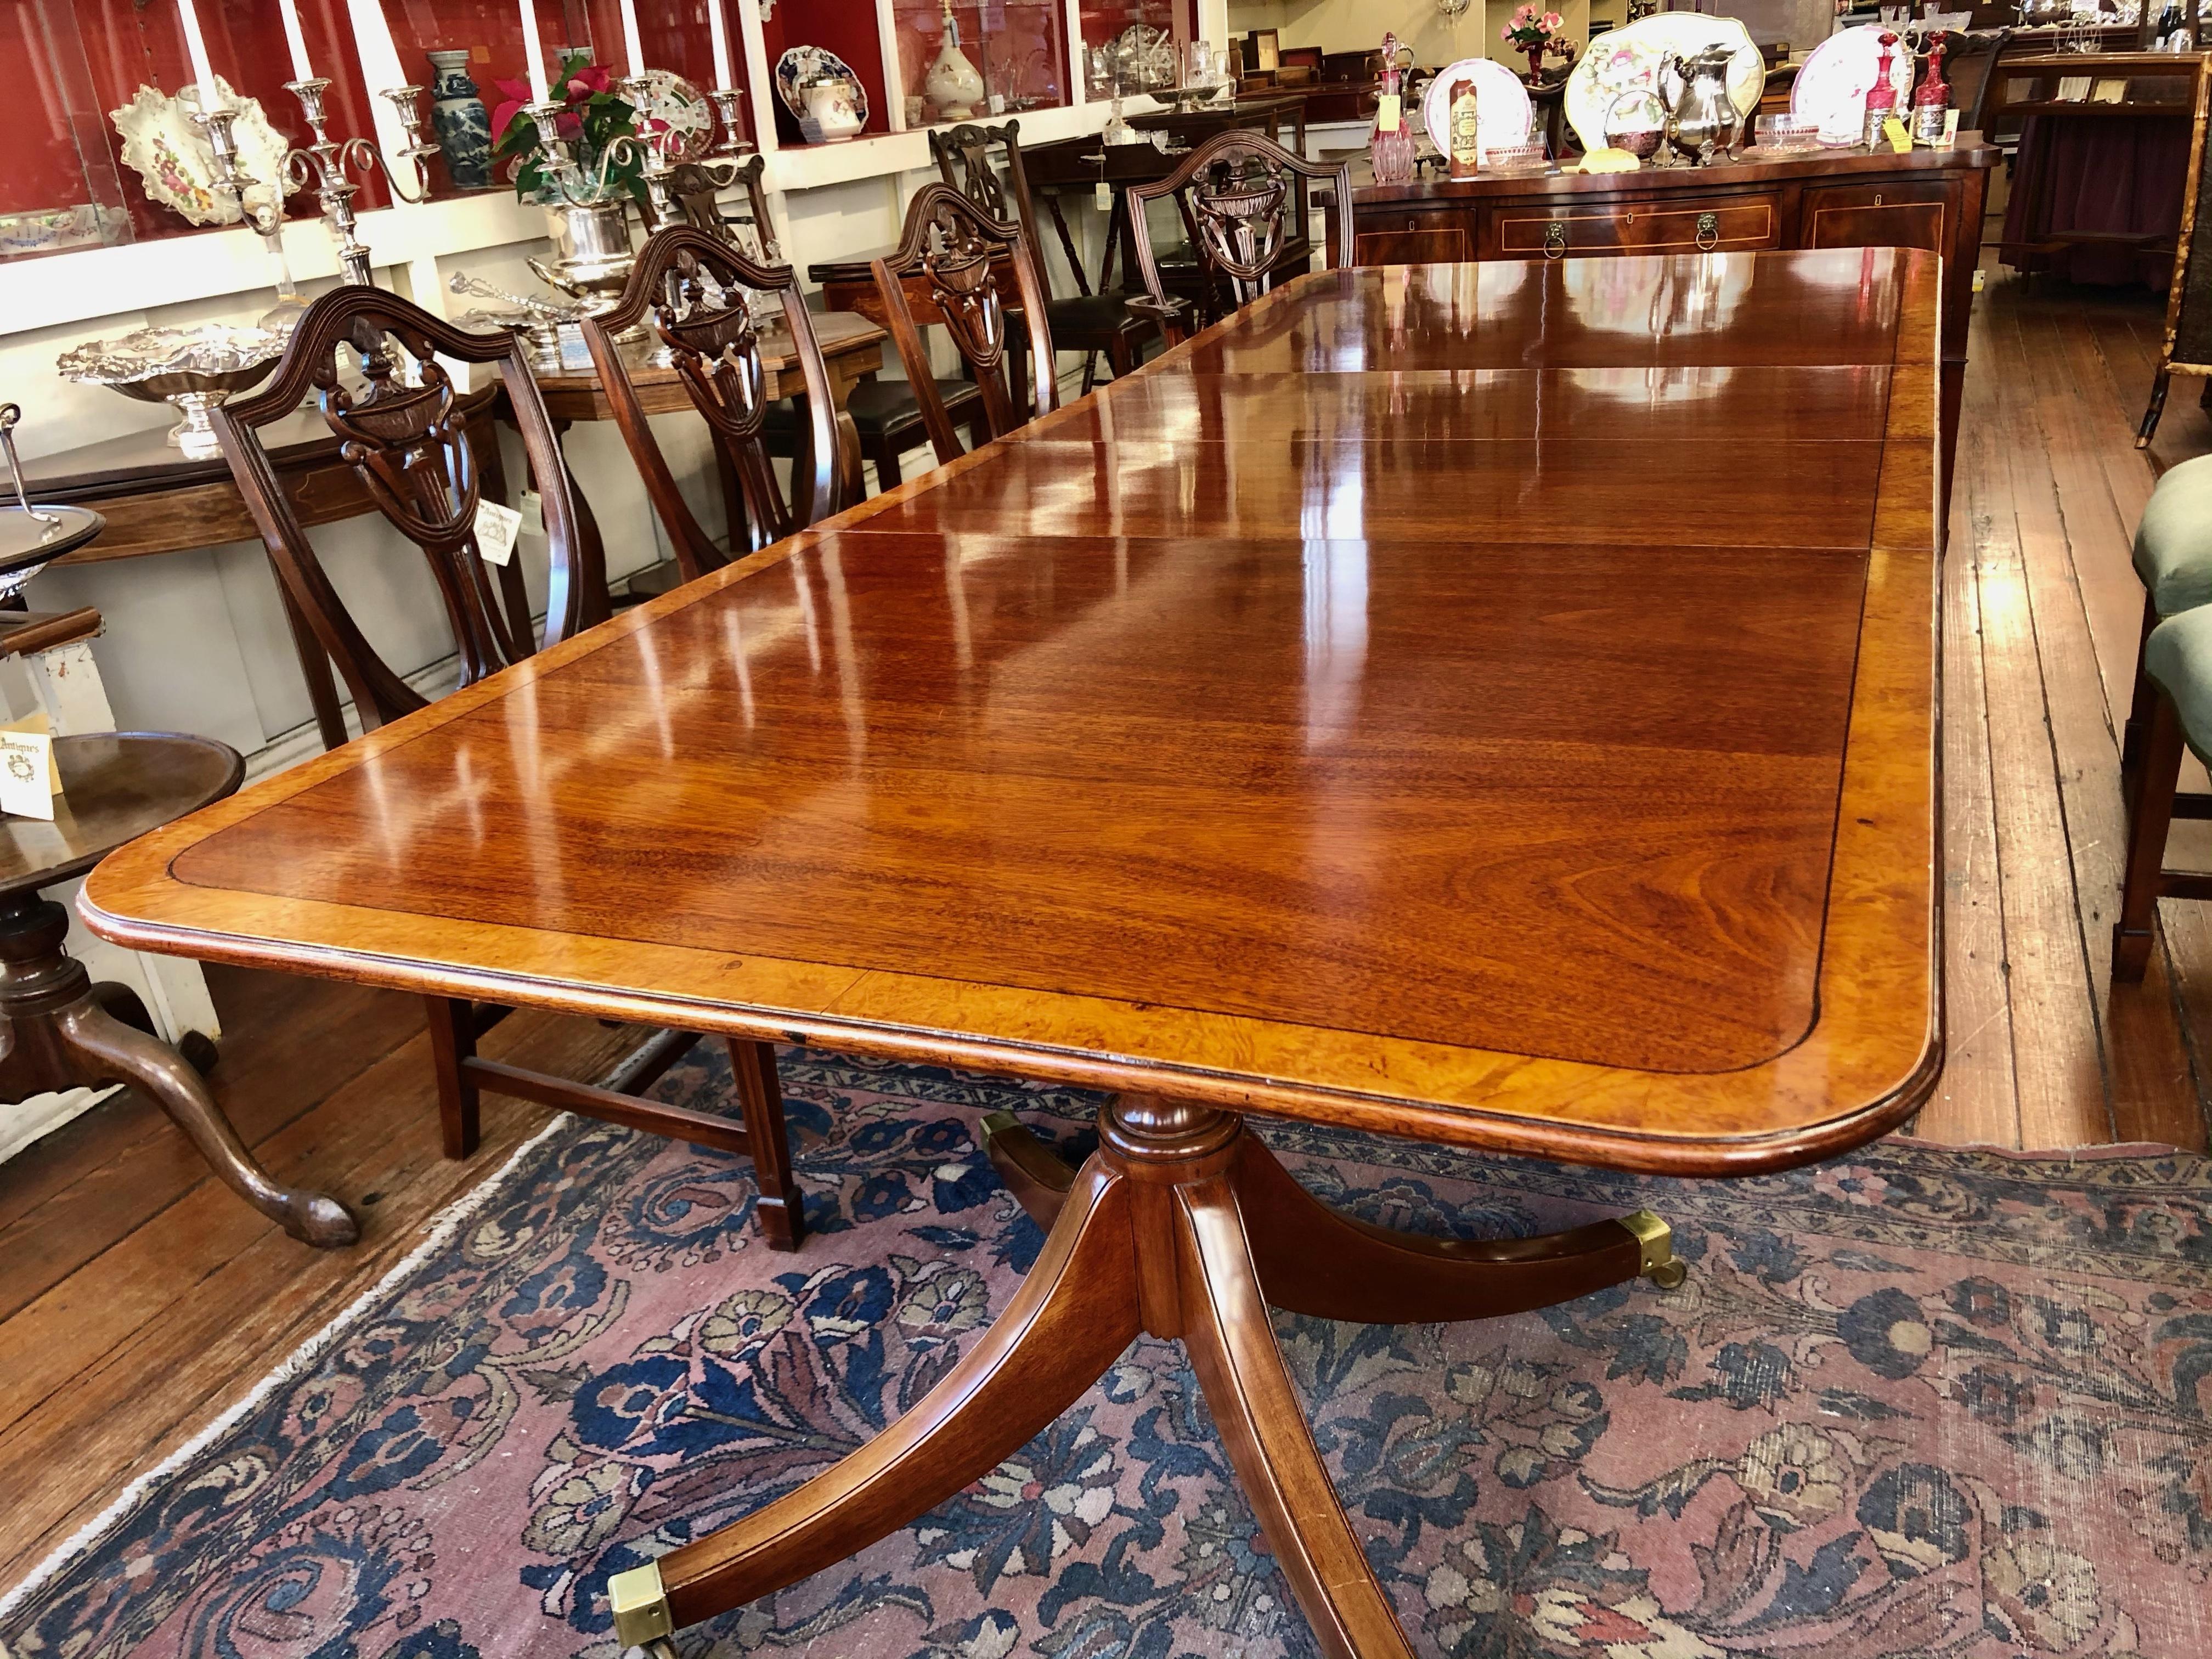 Superb Old English Inlaid figured mahogany Regency or Sheraton style two pedestal two leaf dining table with extraordinary burr walnut crossbanding (inlay) and quad splay leg pedestal with solid brass cap toes and brass casters. Circa 1930-'40.

 